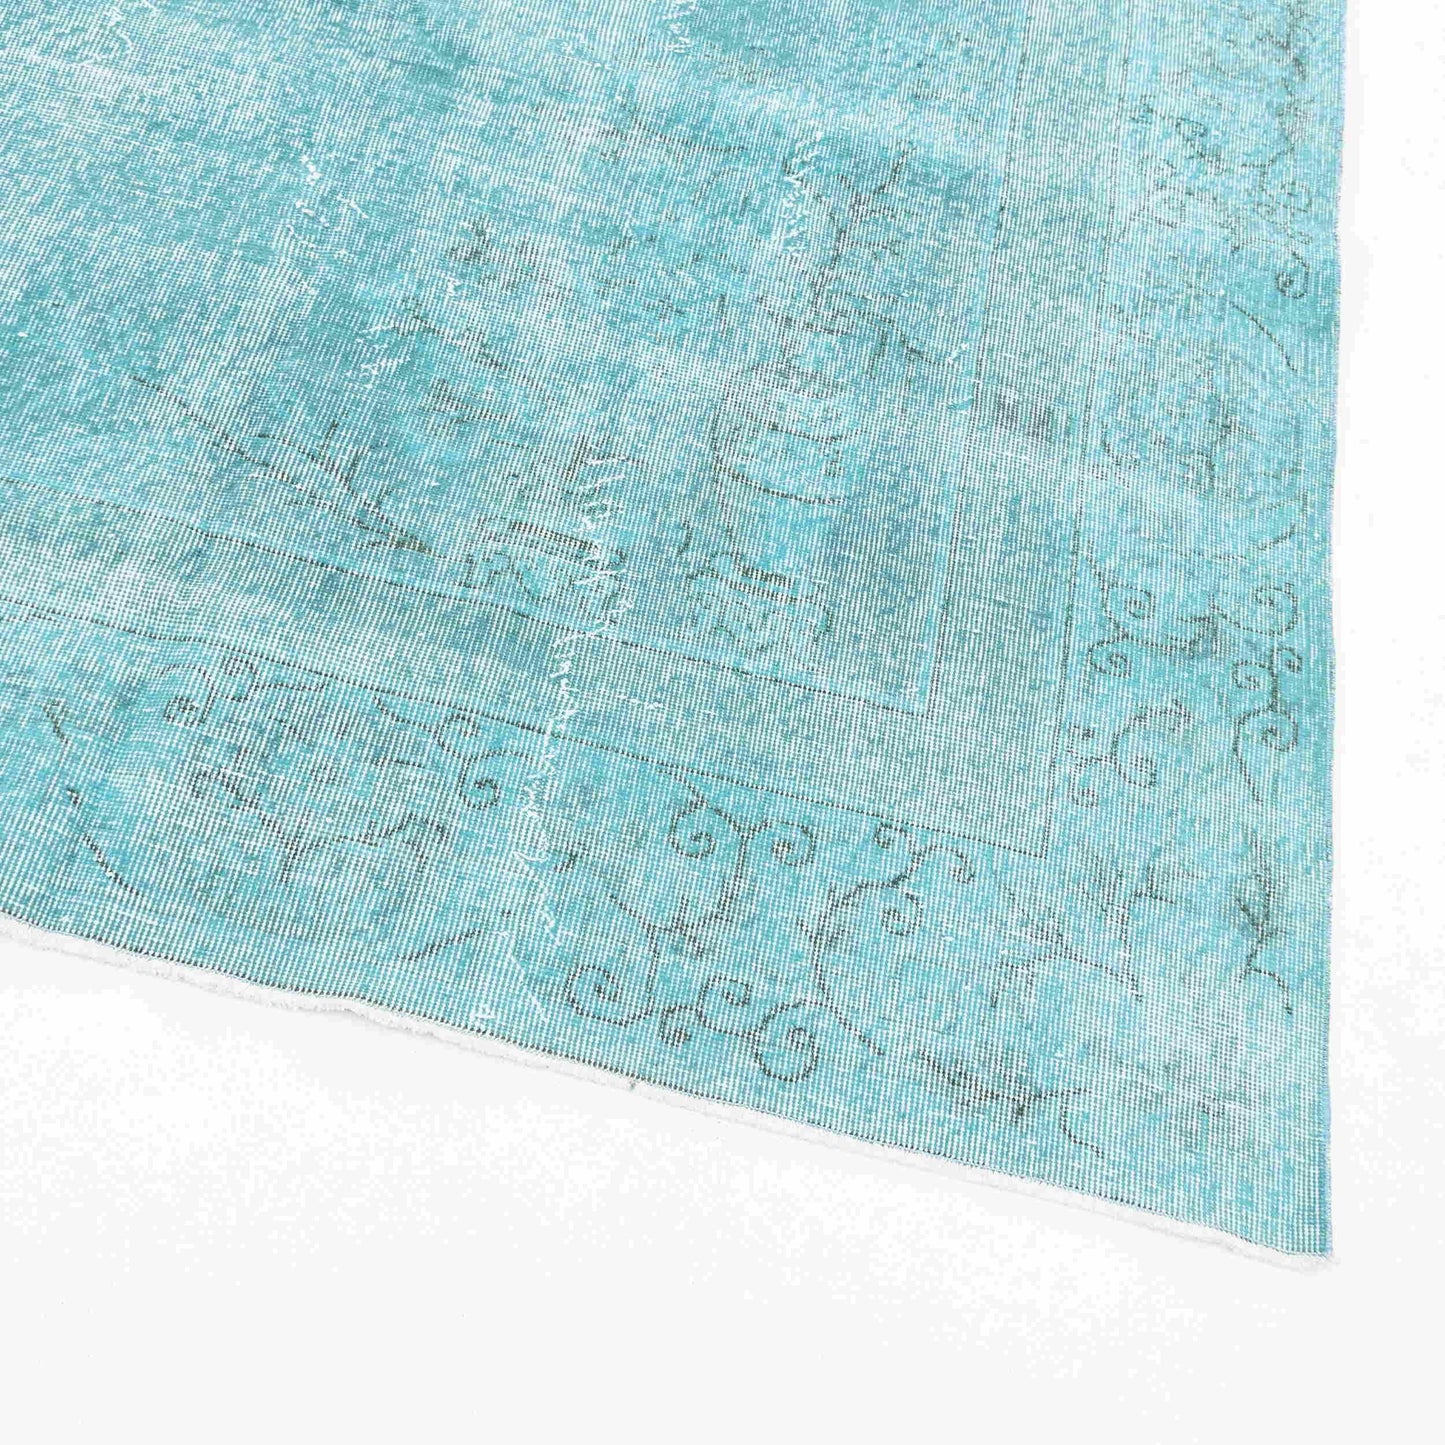 Oriental Rug Vintage Hand Knotted Wool On Cotton 285 x 384 Cm - 9' 5'' x 12' 8'' Turquoise C019 ER34